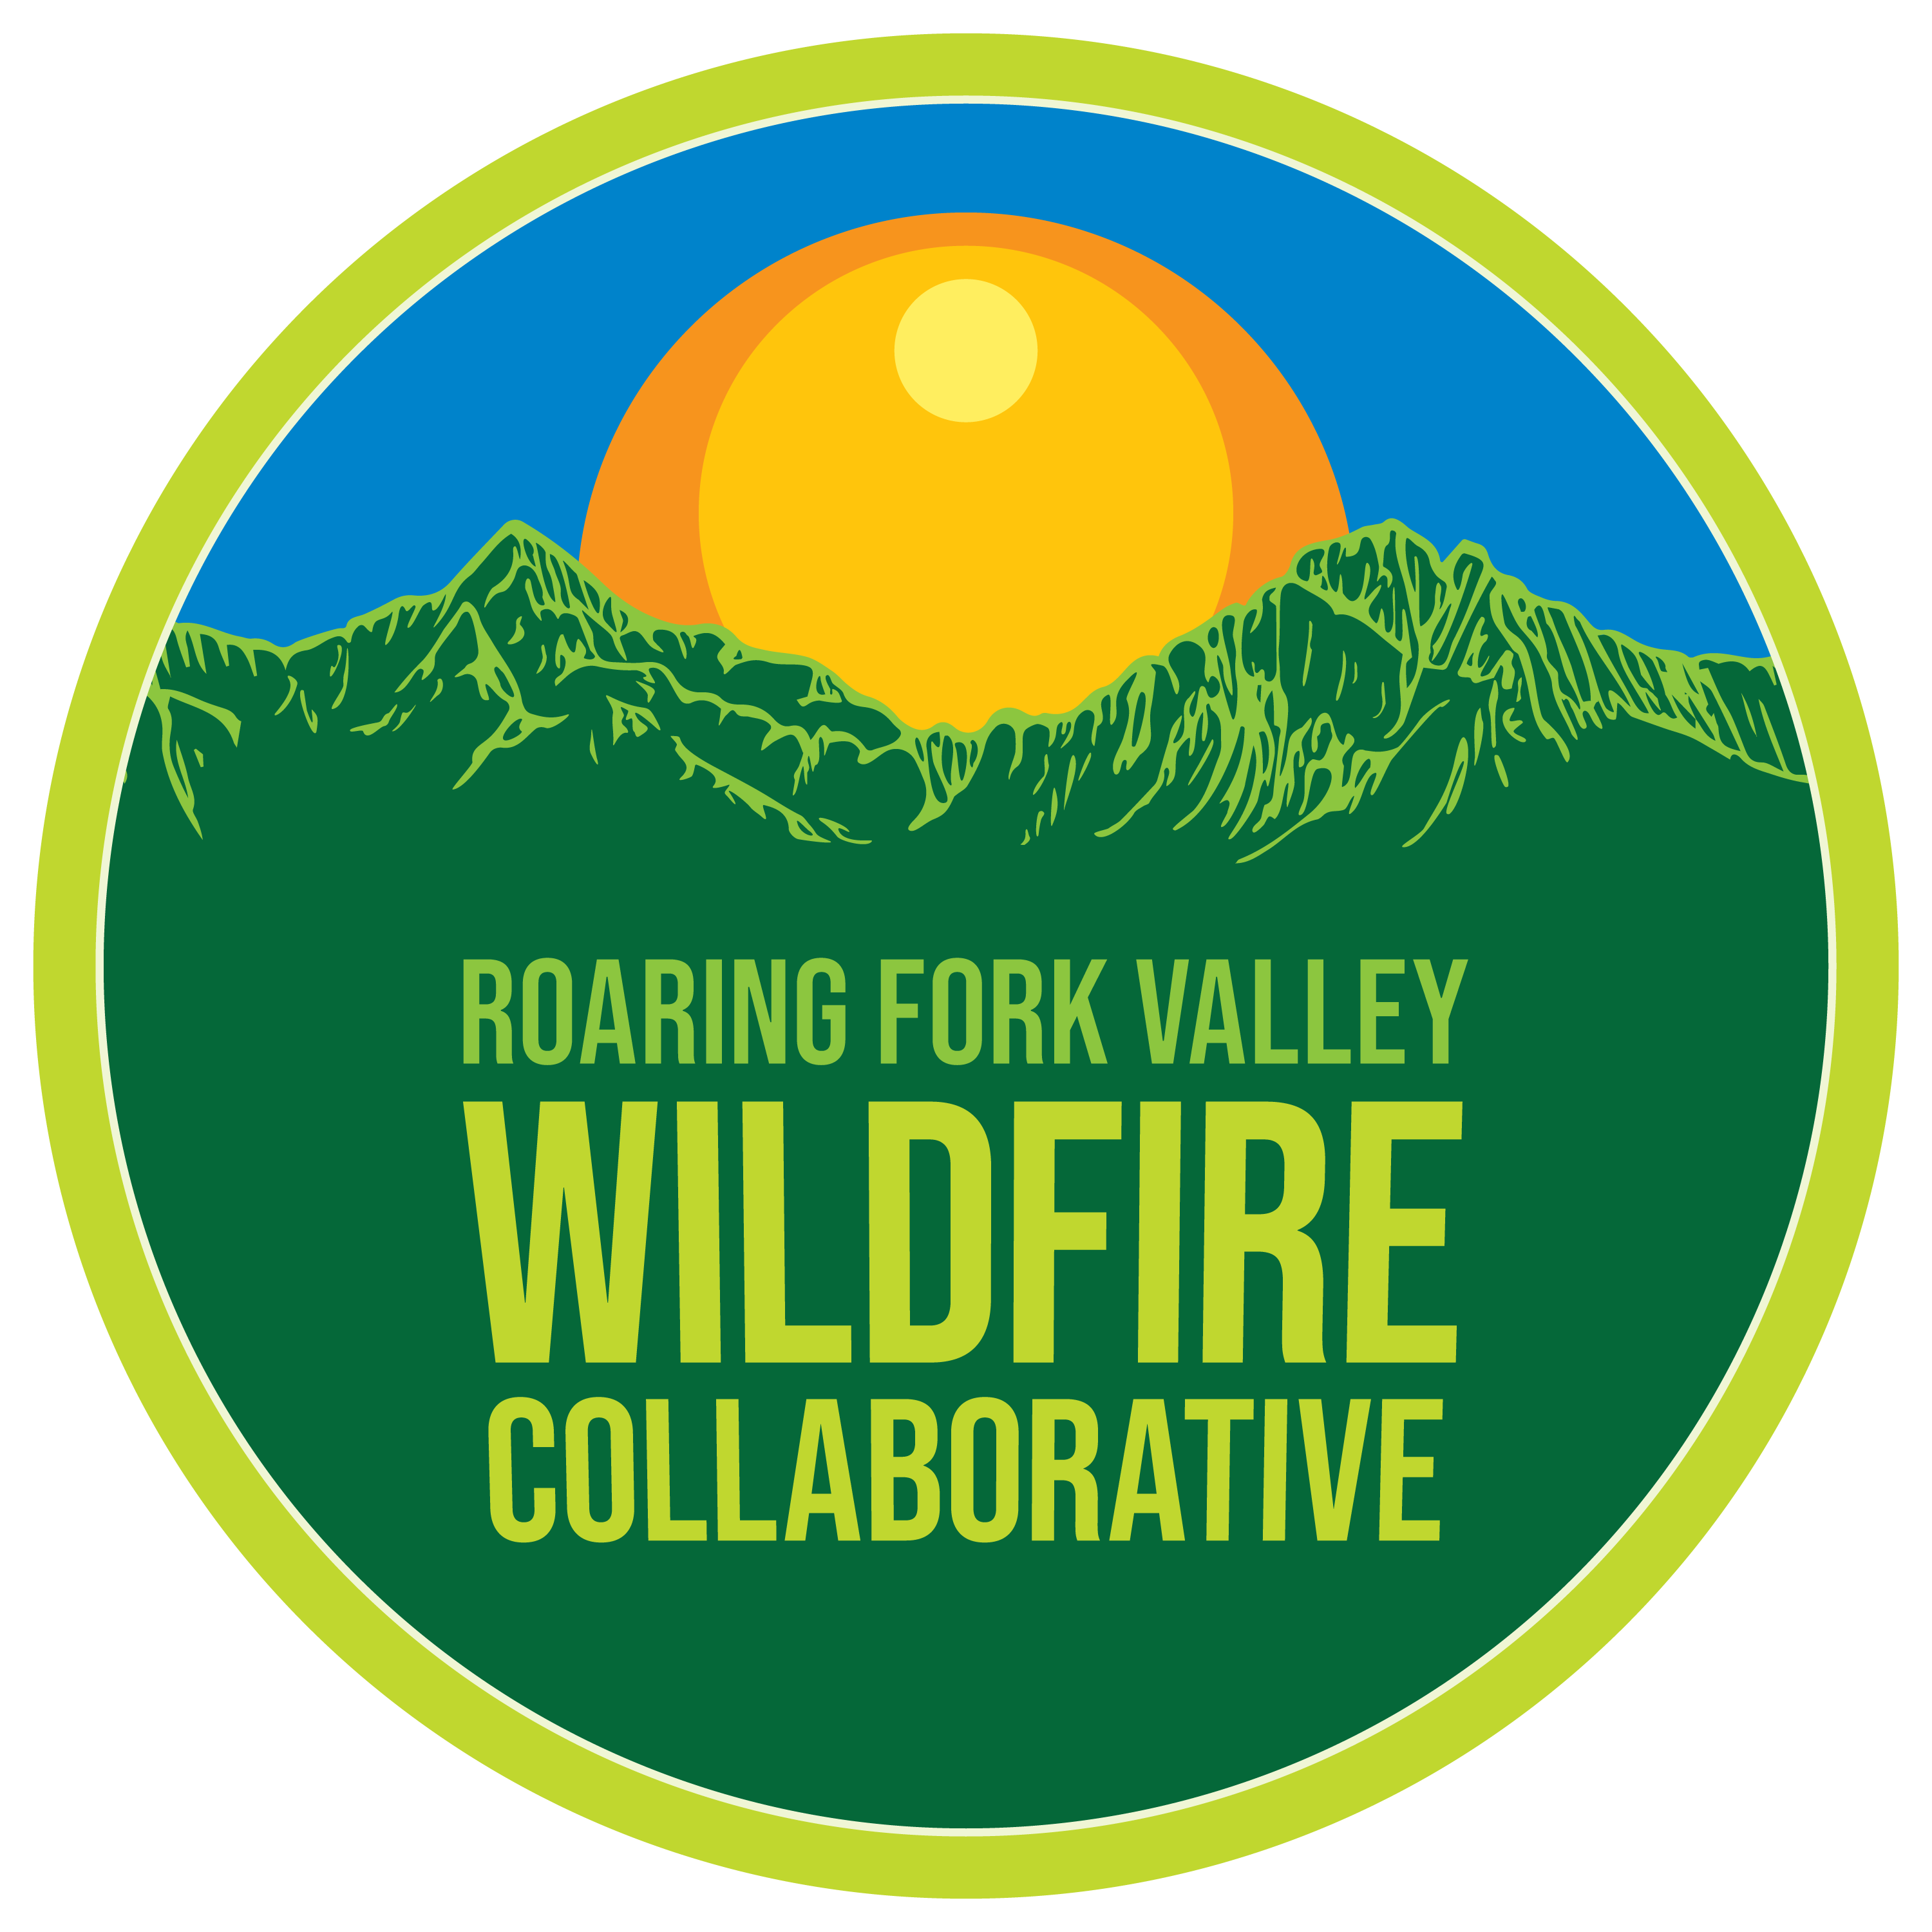 image is a logo for the Roaring Fork Valley Wildfire Collaborative